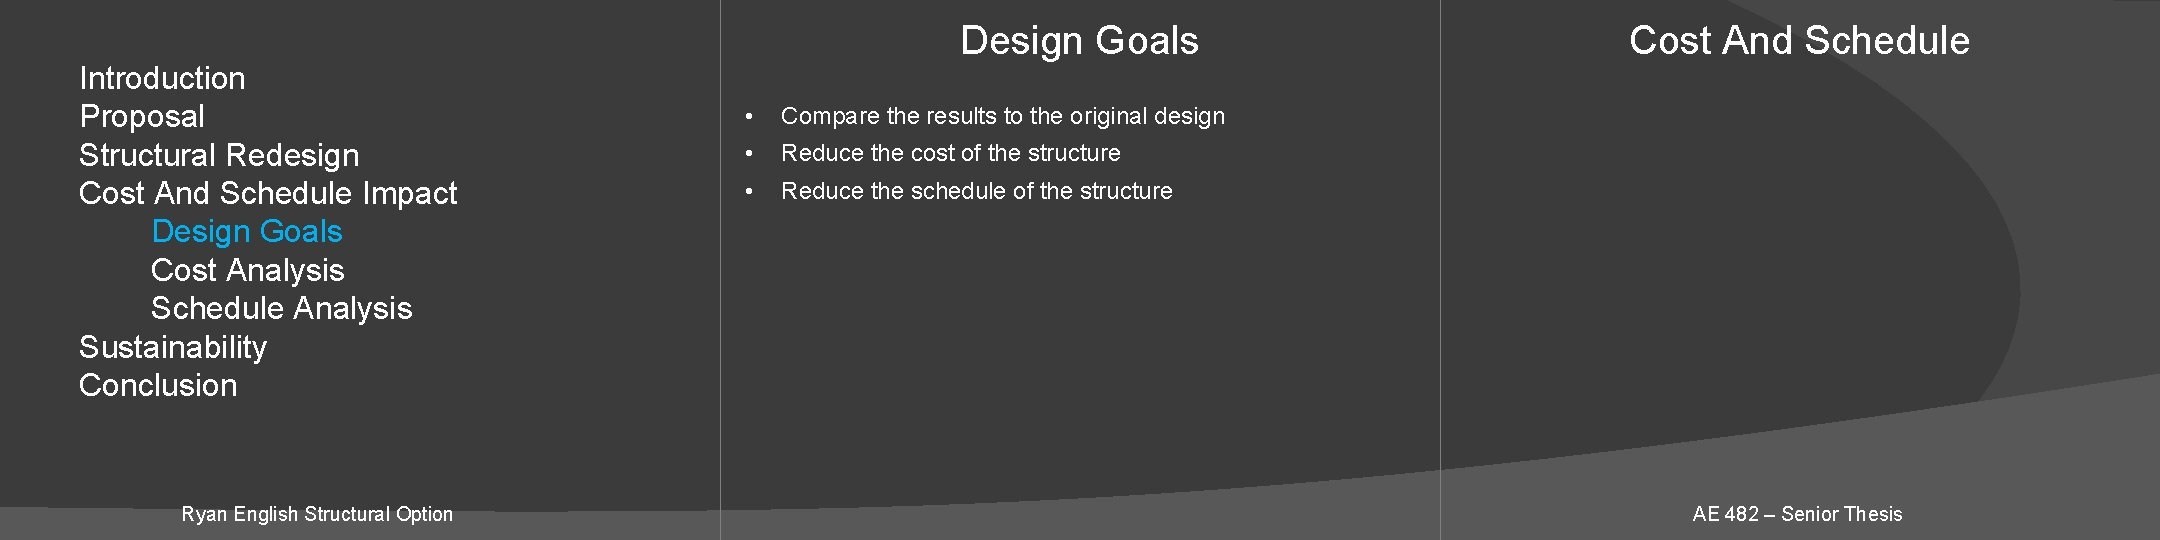 Introduction Proposal Structural Redesign Cost And Schedule Impact Design Goals Cost Analysis Schedule Analysis